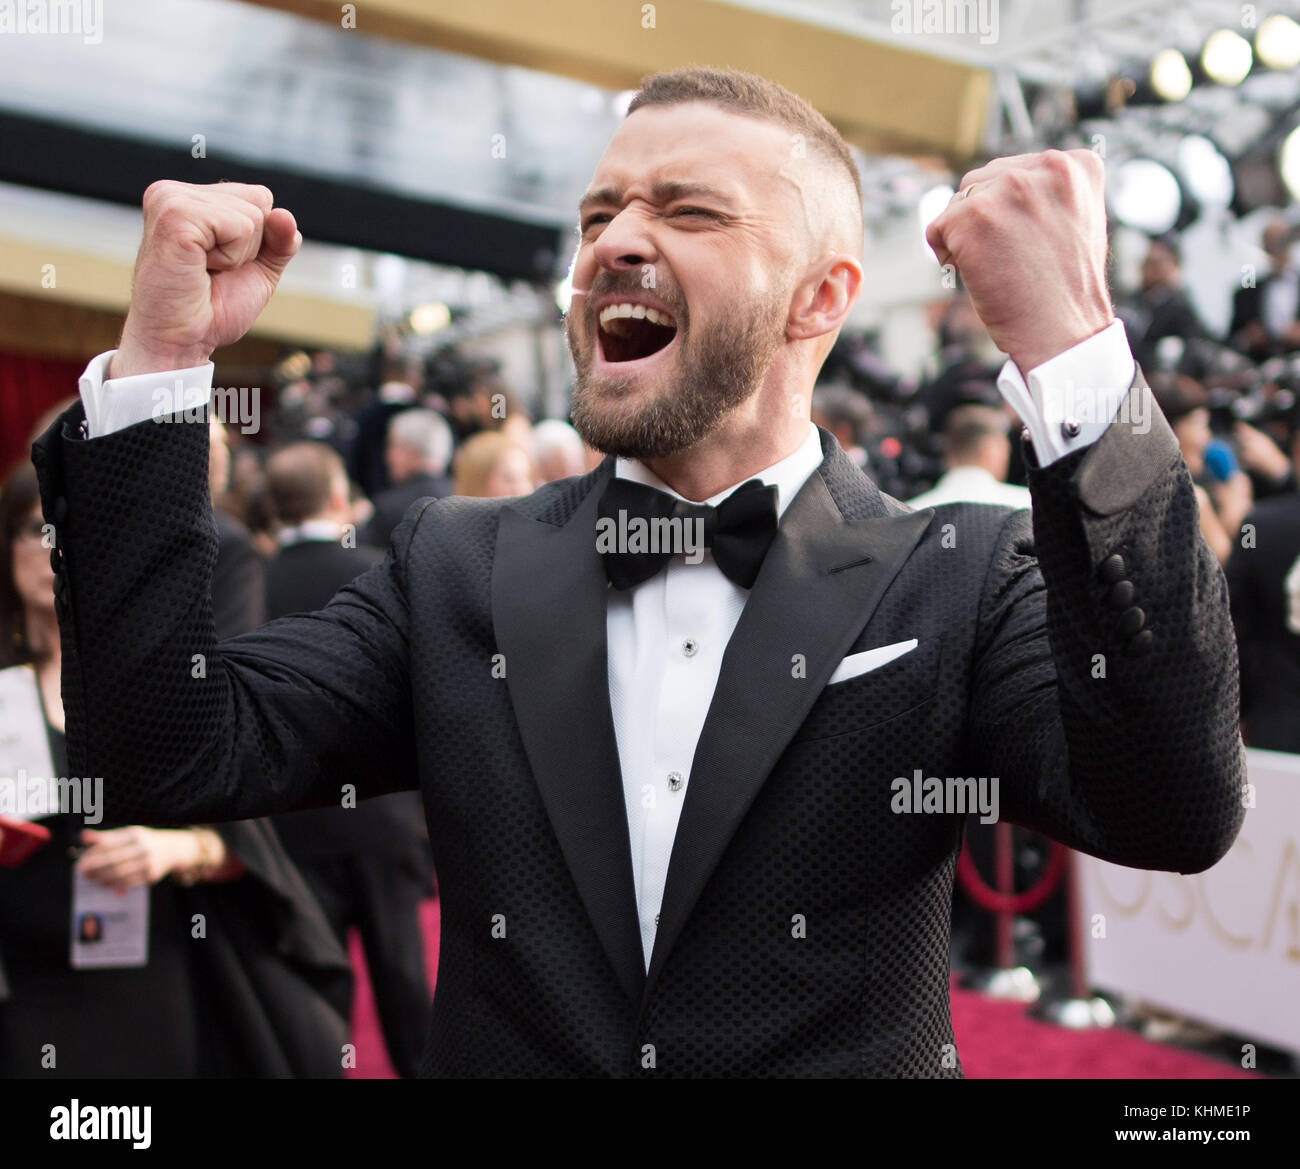 HOLLYWOOD, CA - FEBRUARY 26: Justin Timberlake  attends the 89th Annual Academy Awards at Hollywood & Highland Center on February 26, 2017 in Hollywood, California  People:  Justin Timberlake   Transmission Ref:  MNC Stock Photo